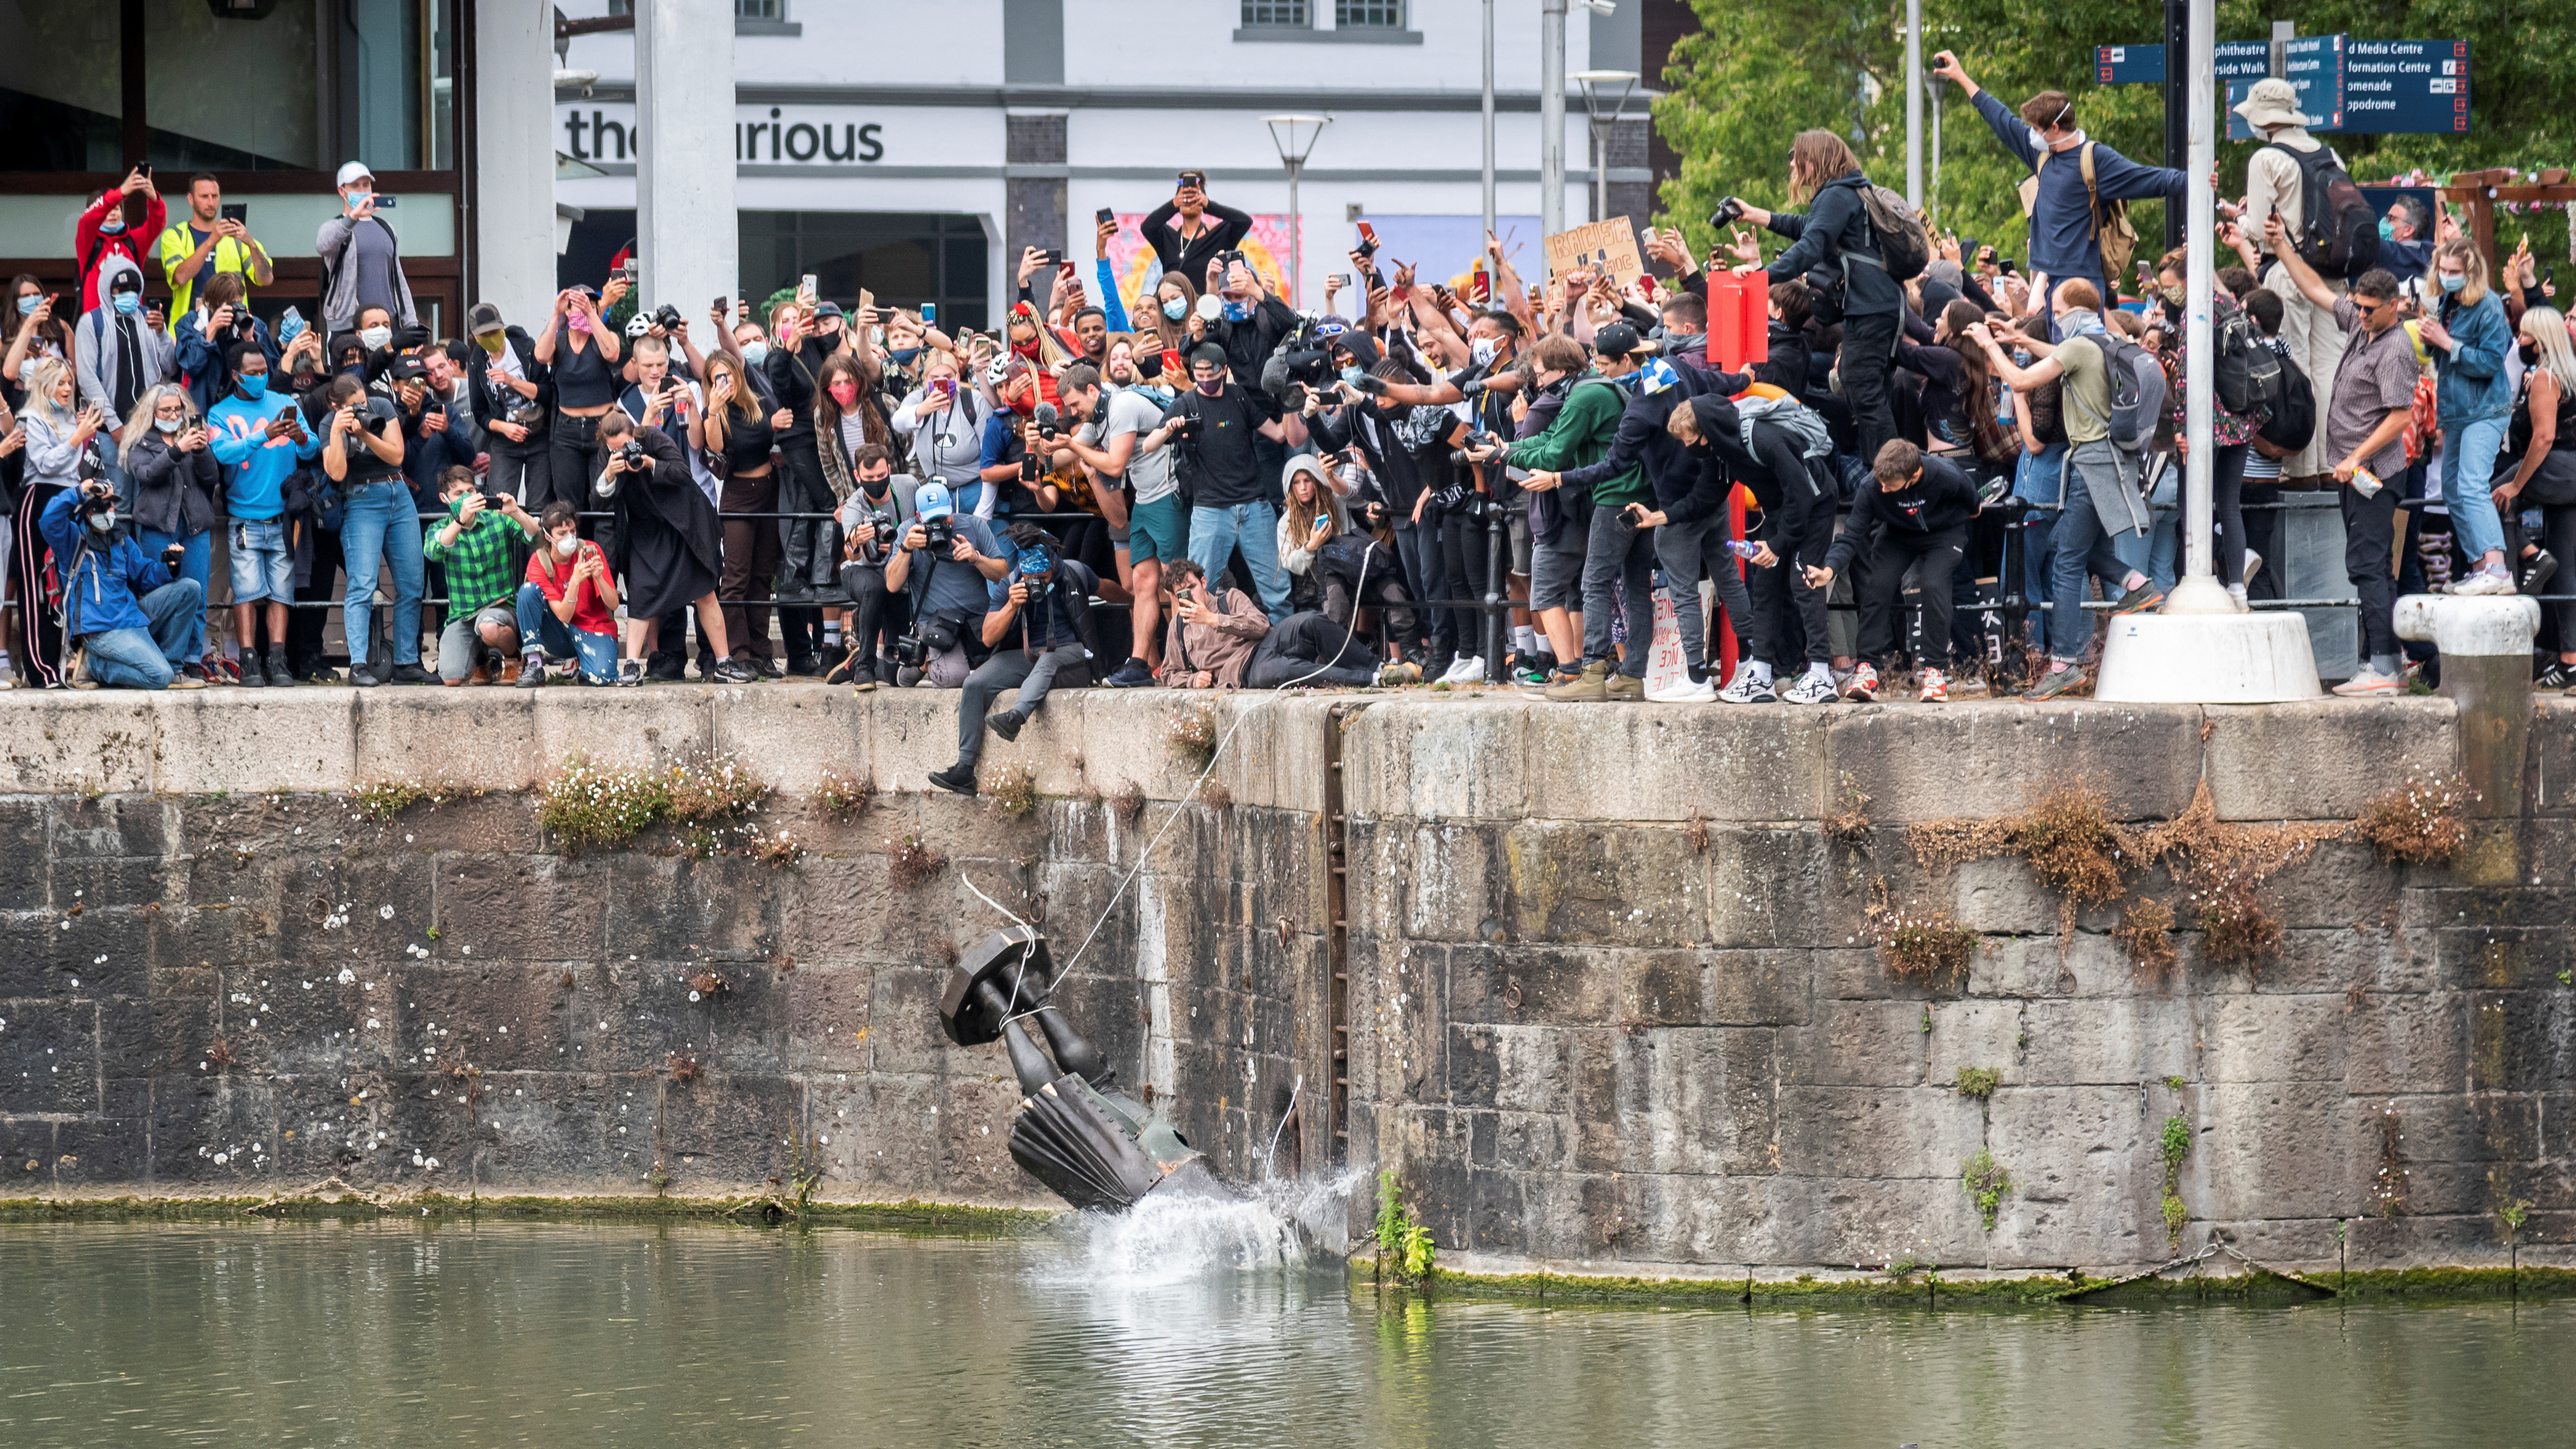 The statue of Edward Colston falls into the water after protesters pulled it down in Bristol